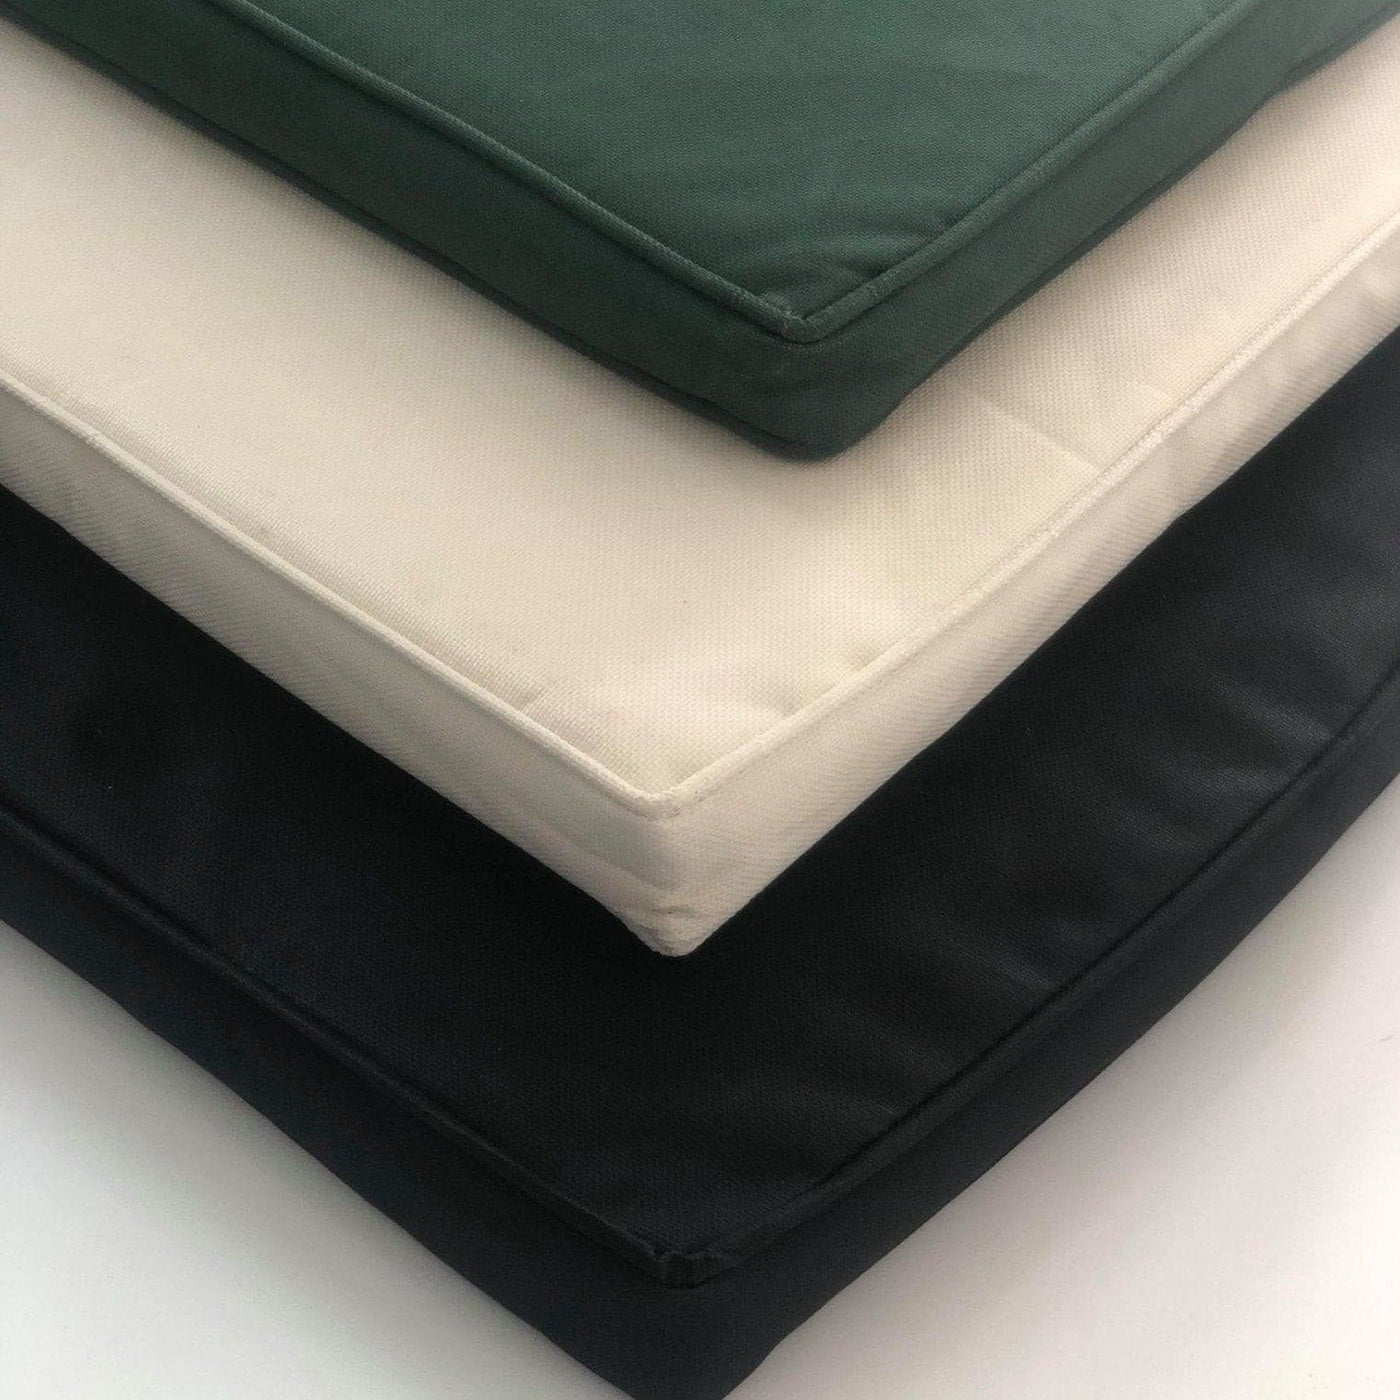 A stack of square cushions in black, white, beige, and green, arranged neatly on a Teak 180cm Maximus Round Stacking Set (8 Oxford Stacking Chairs) Complete set Cushions included.